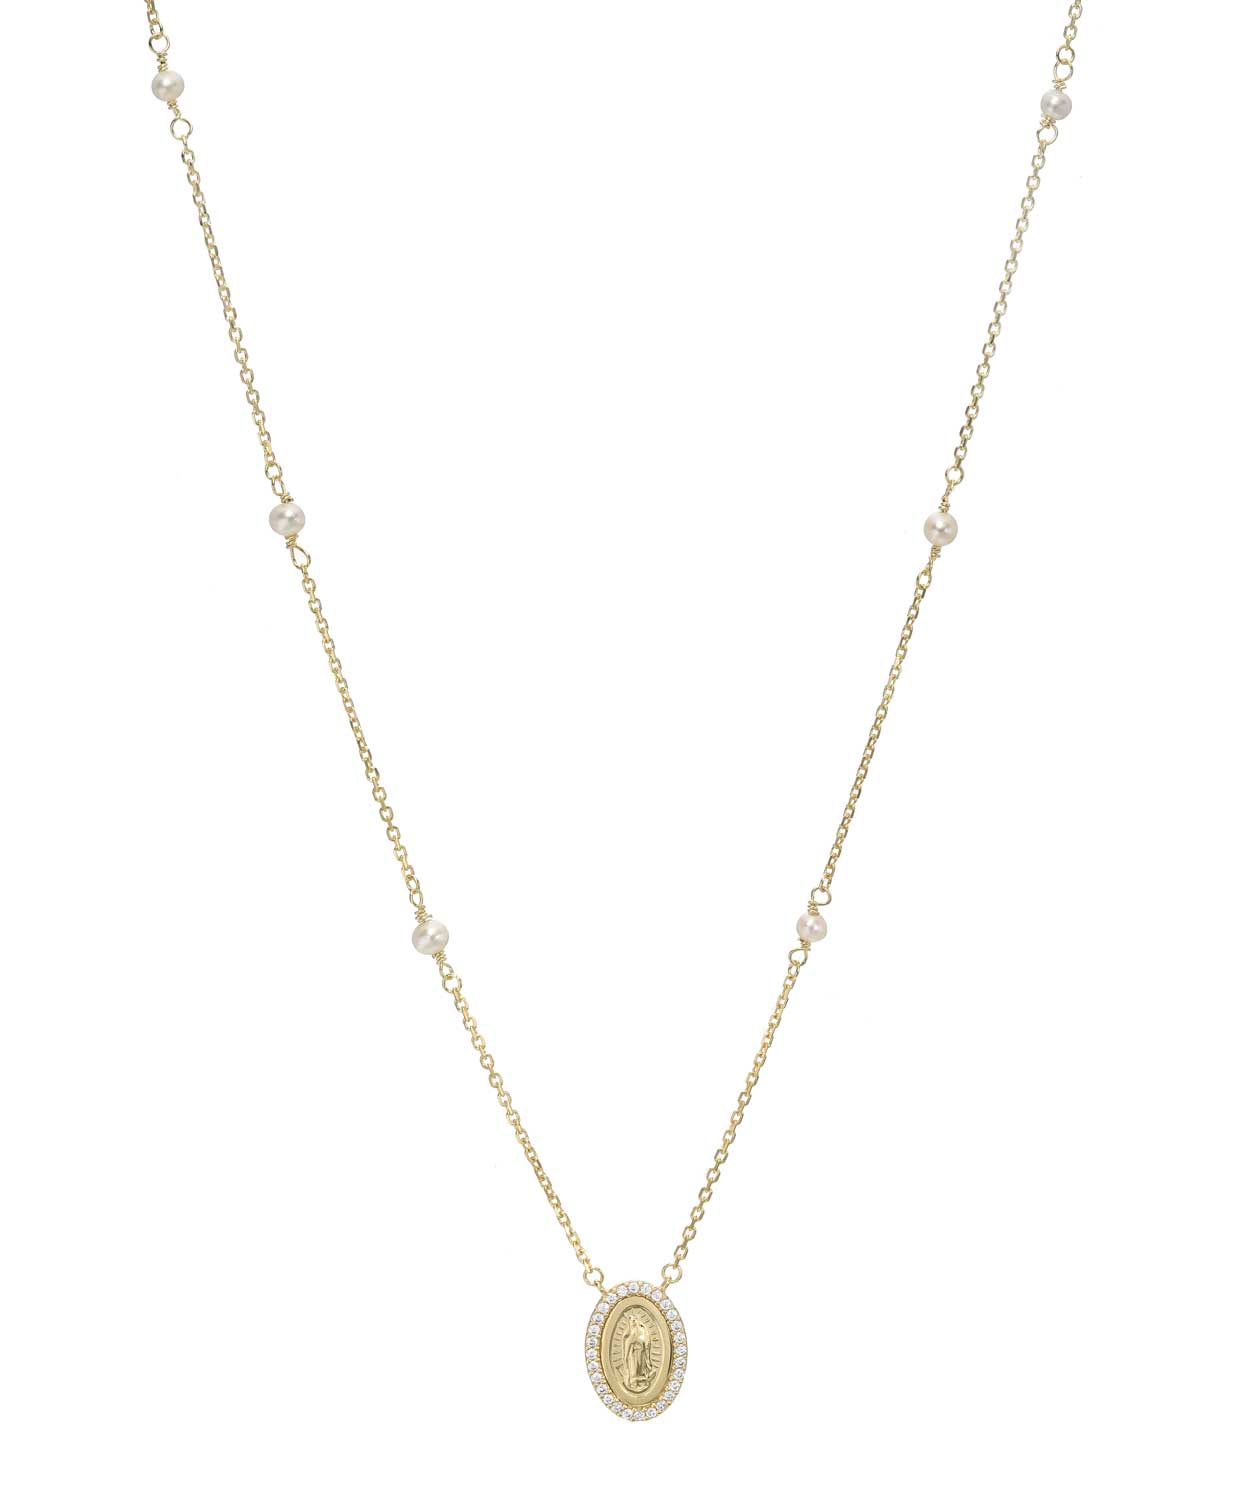 Natural White Freshwater Pearl and Brilliant Cut Cubic Zirconia 14k Yellow Gold Rosary Necklace View 1